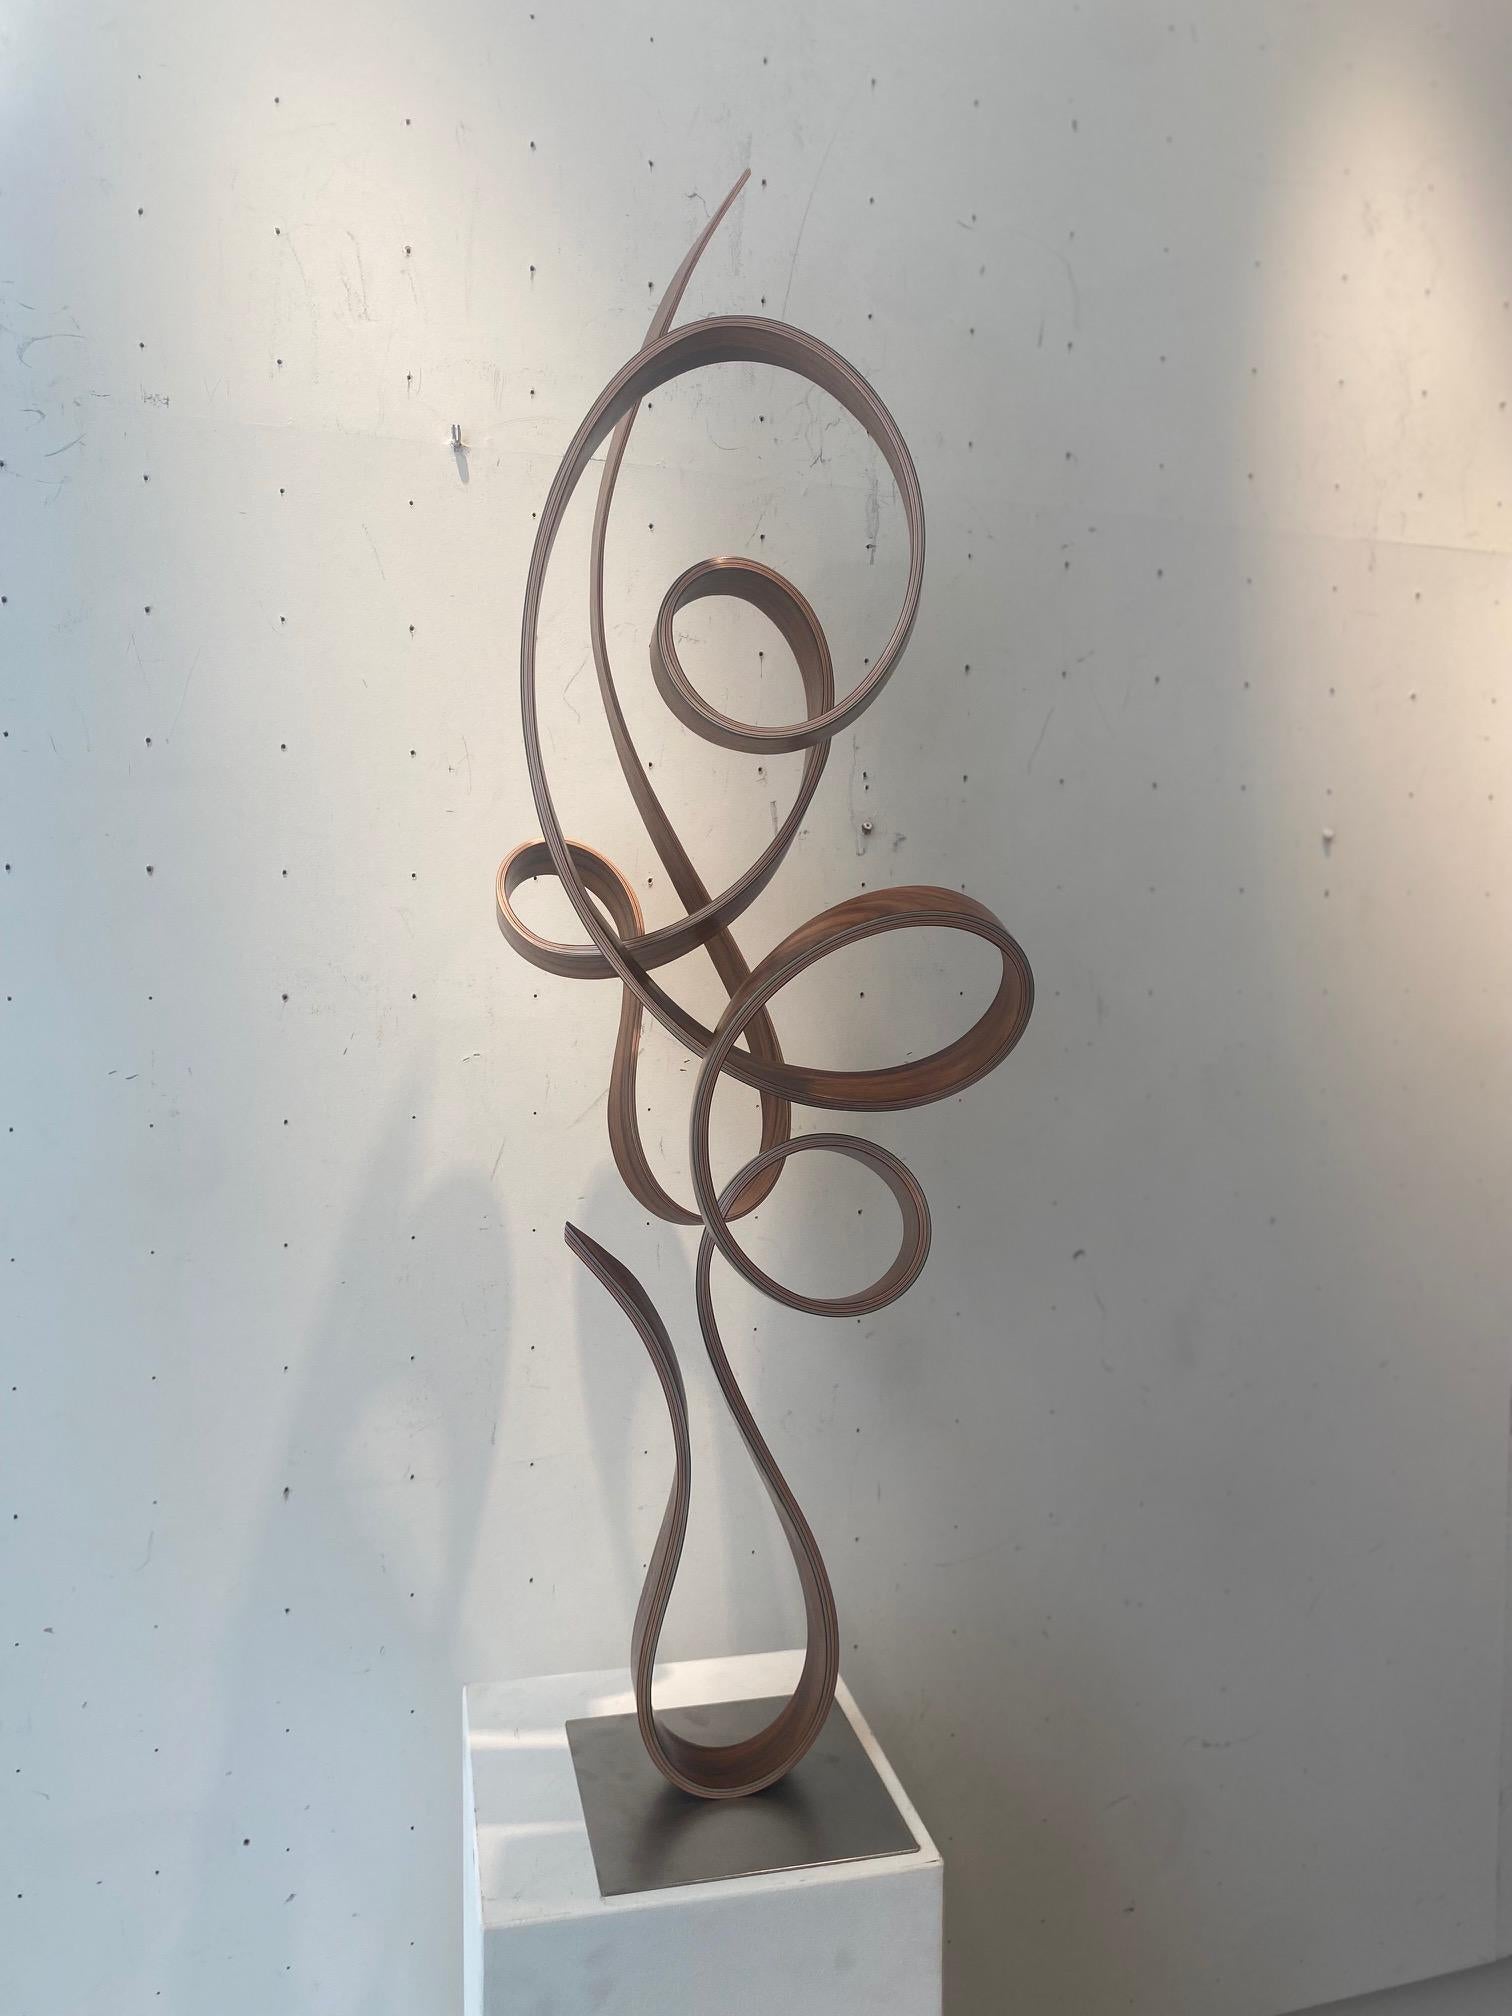 MWT-curvilinear minimalist maple wood sculpture defying gravity by Jacinto Moros 3